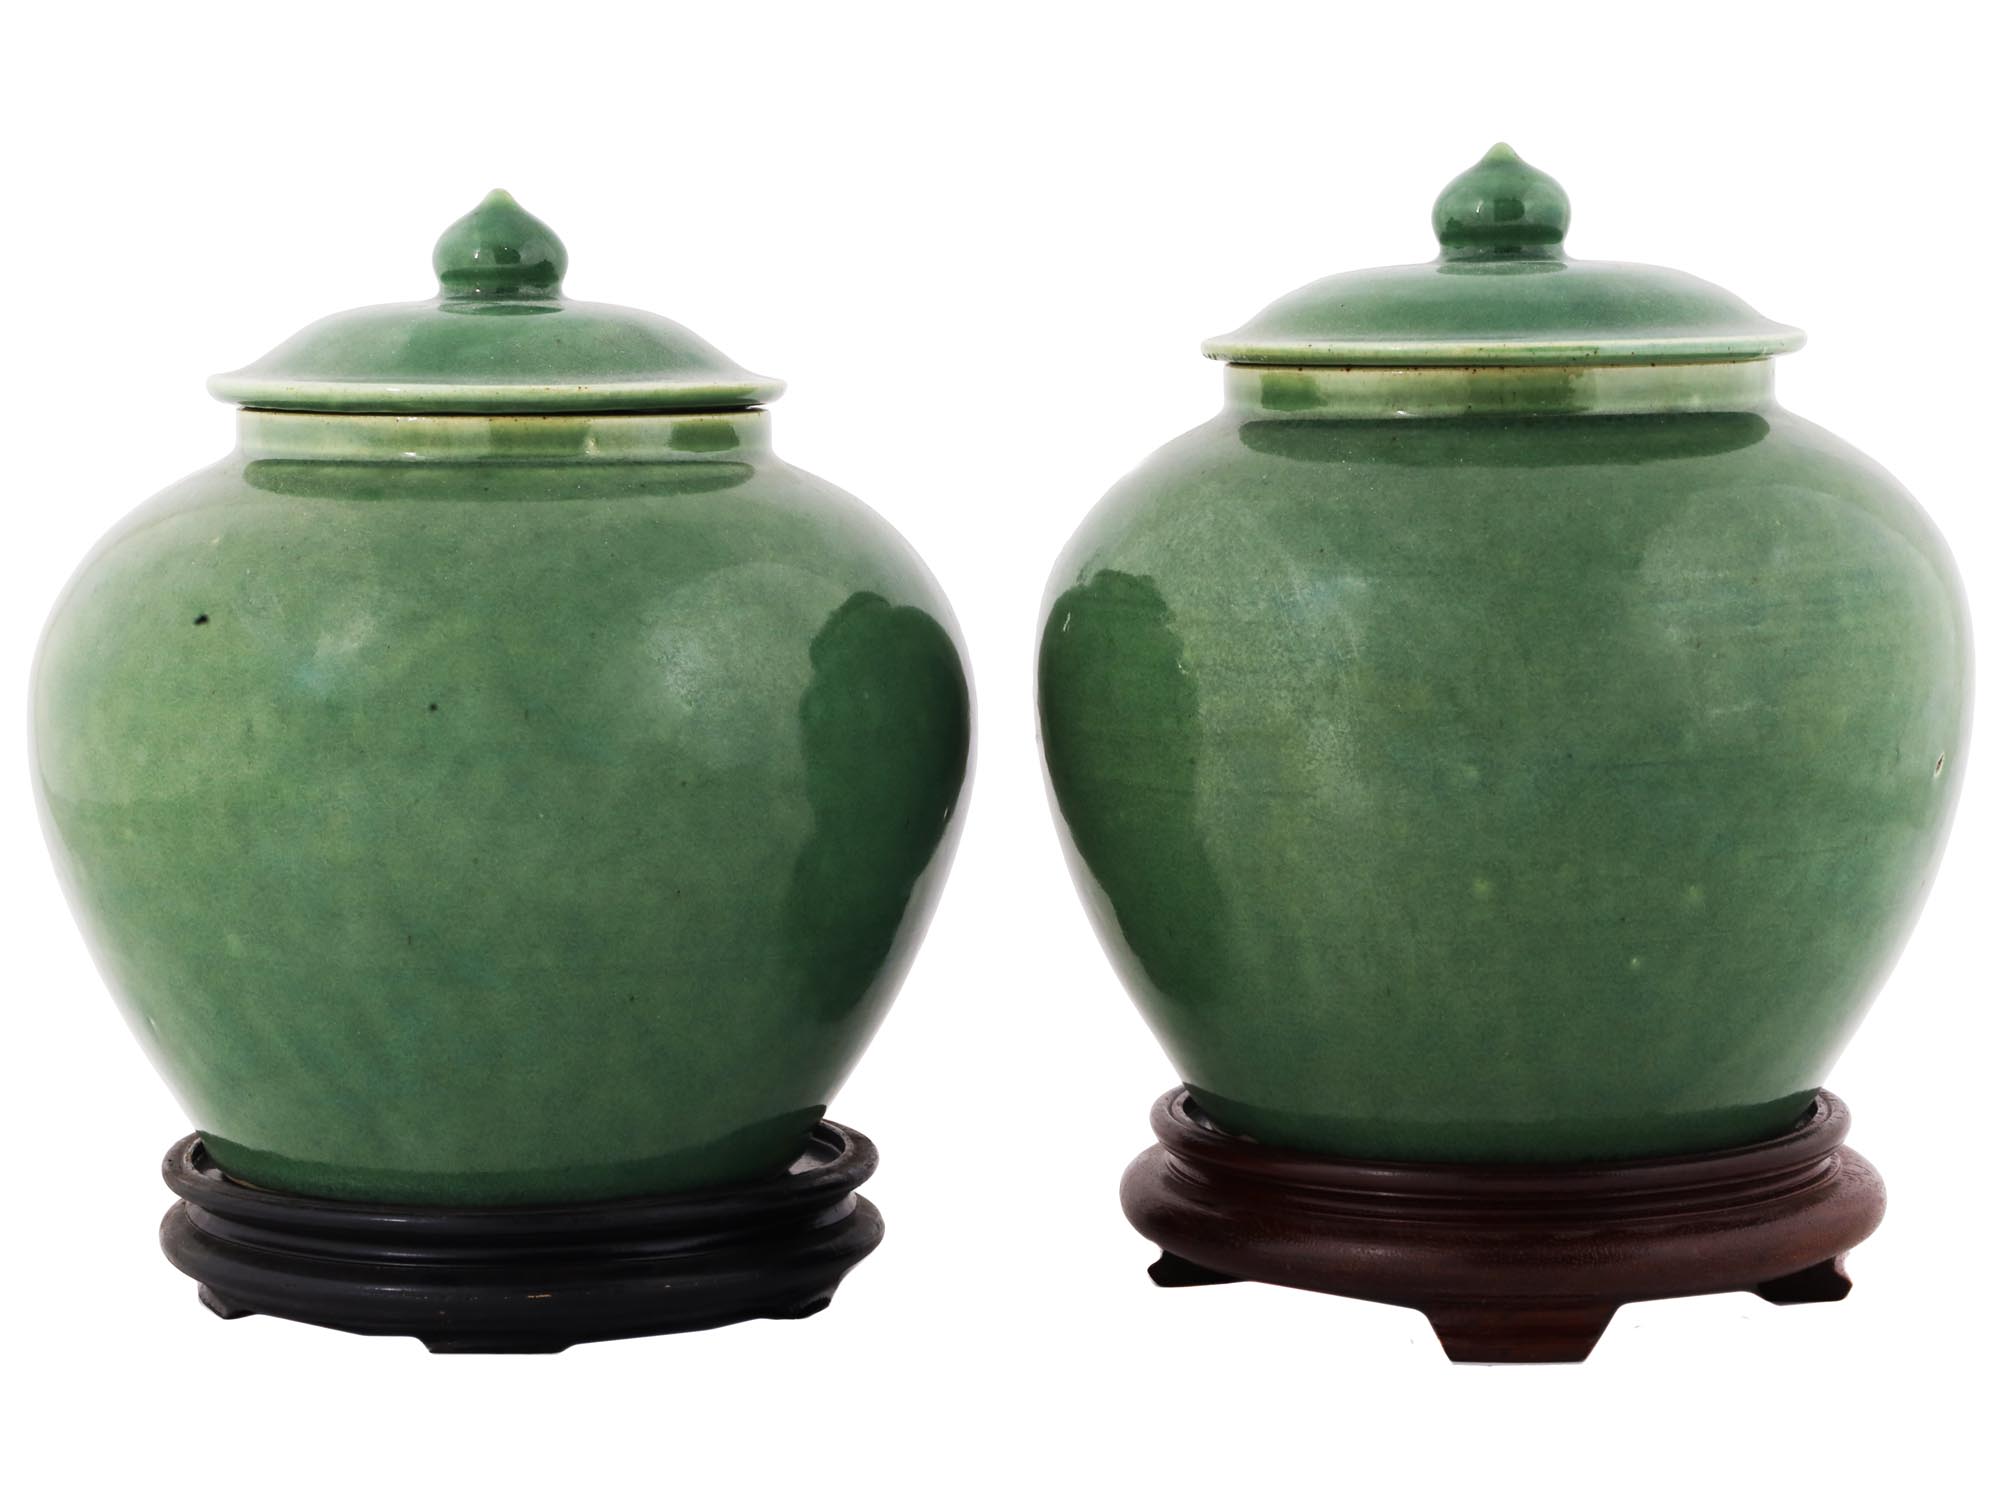 PAIR OF ORIENTAL CERAMIC JARS BY BARTHOLD COPPER PIC-0